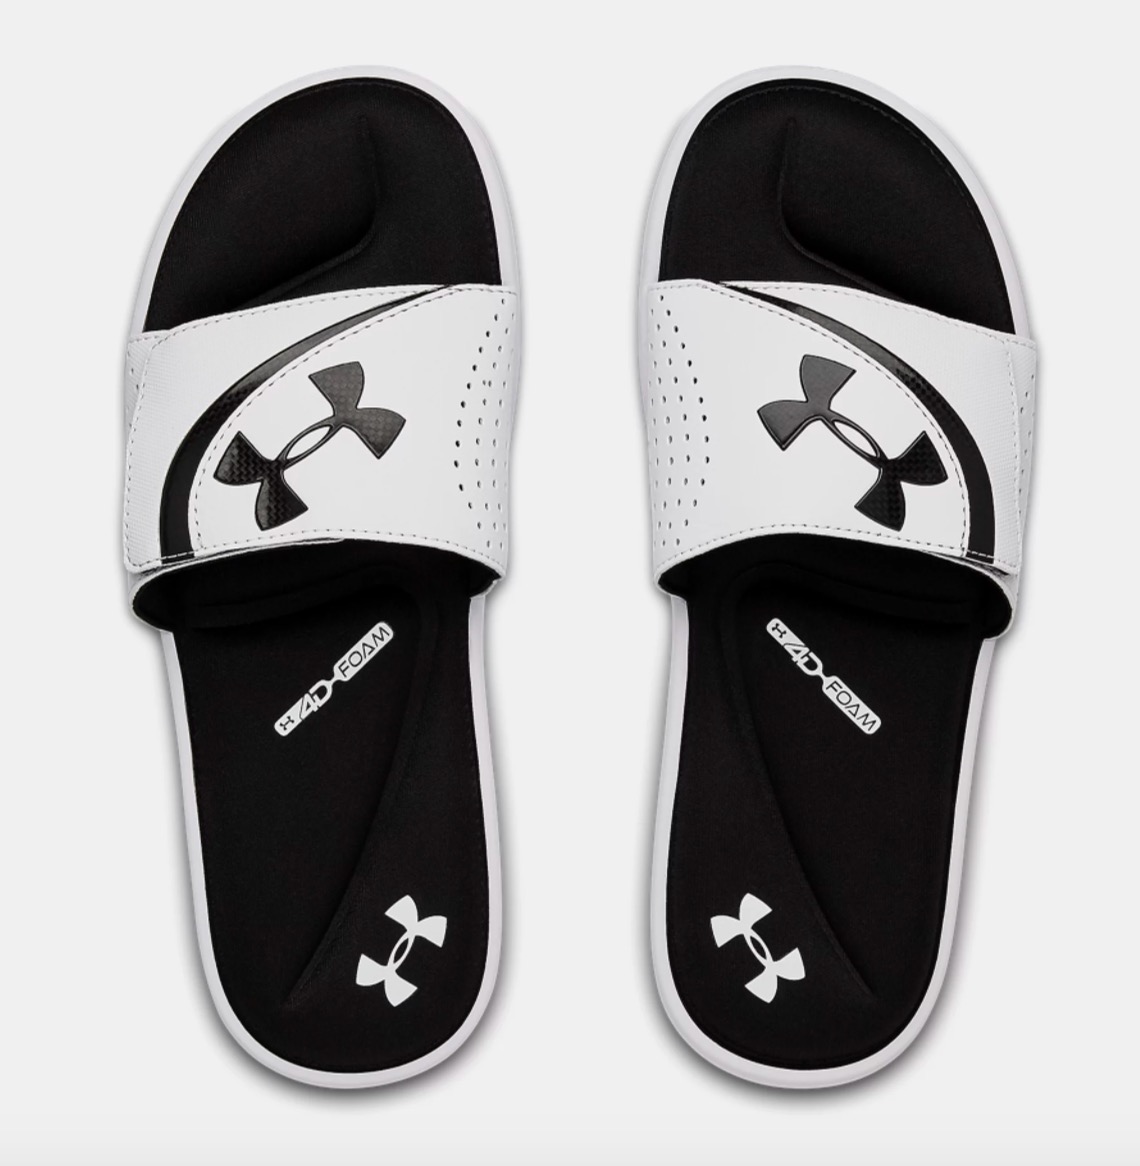 Under Armour Is Now Offering Free Shipping On Footwear Until 8/20 ...